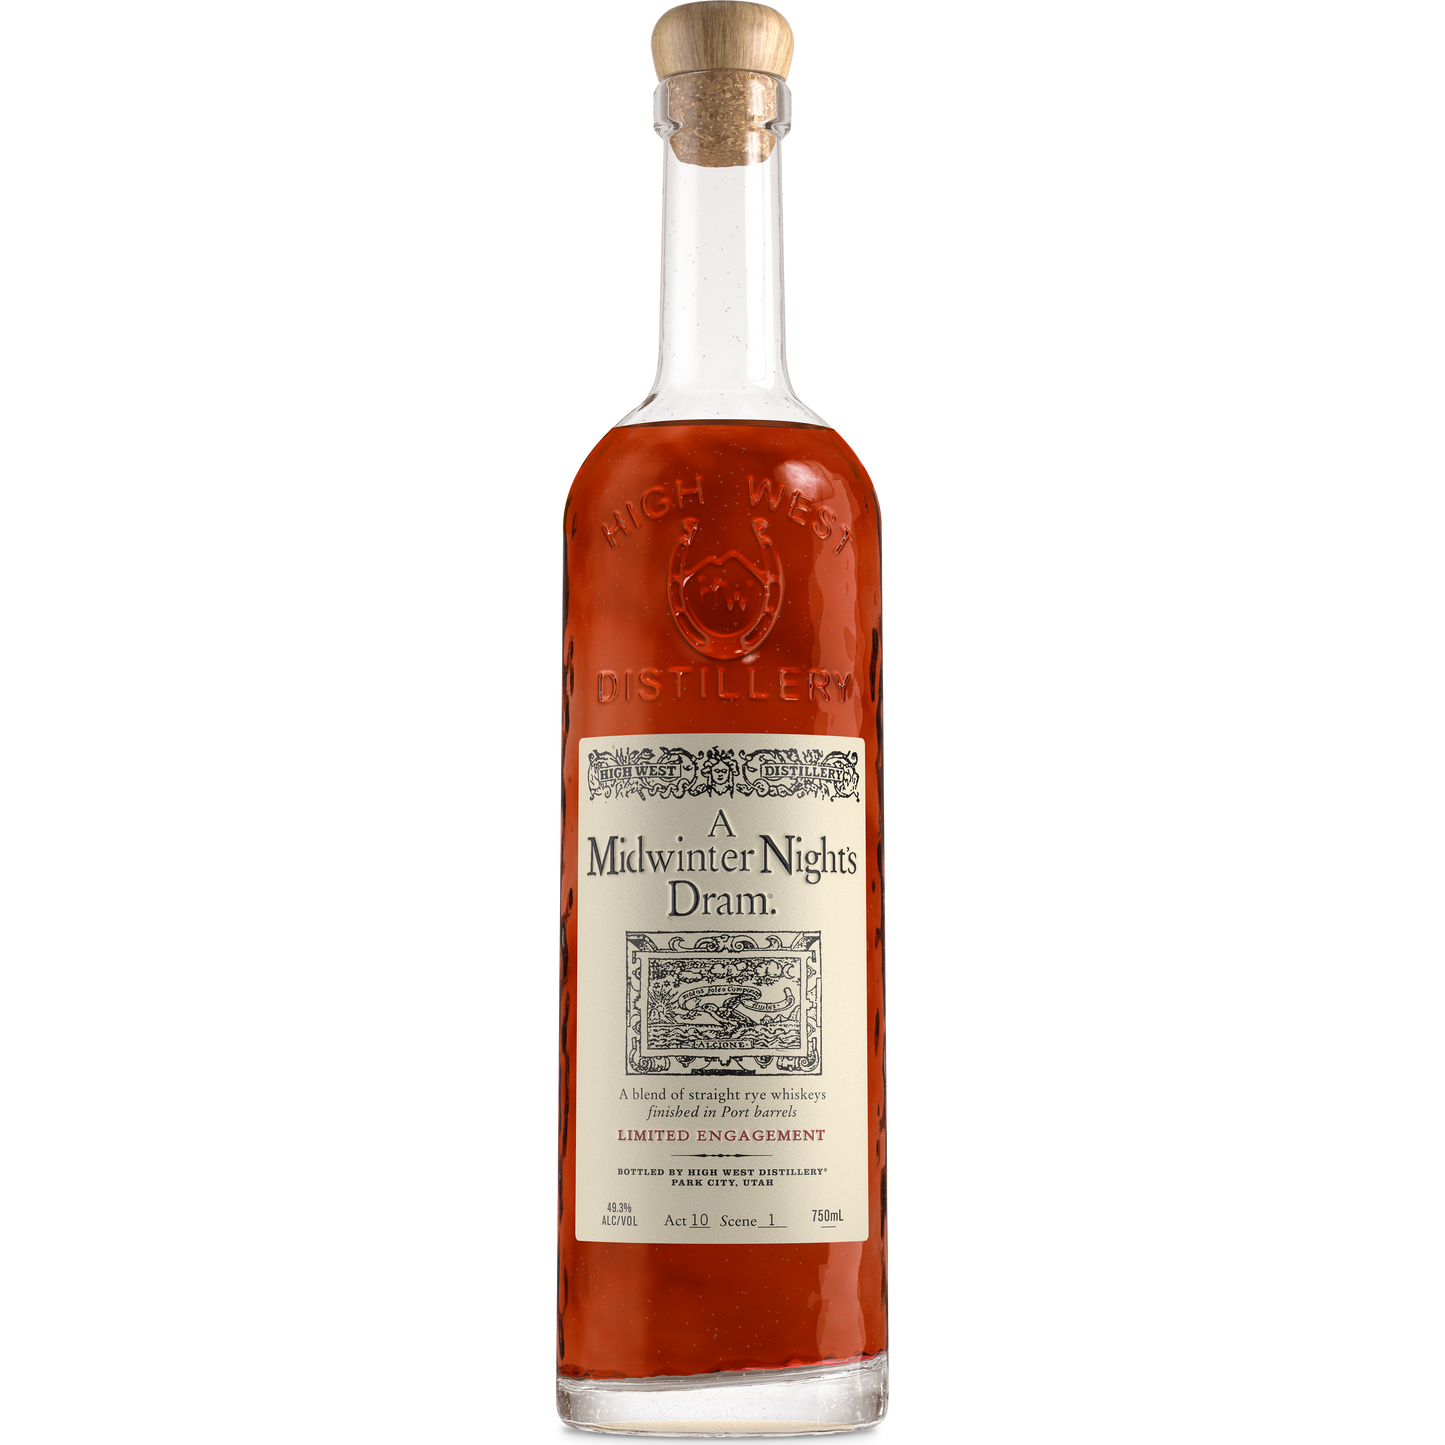 High West Distillery ‘A Midwinter Nights Dram’ Straight Rye Blended Whiskey